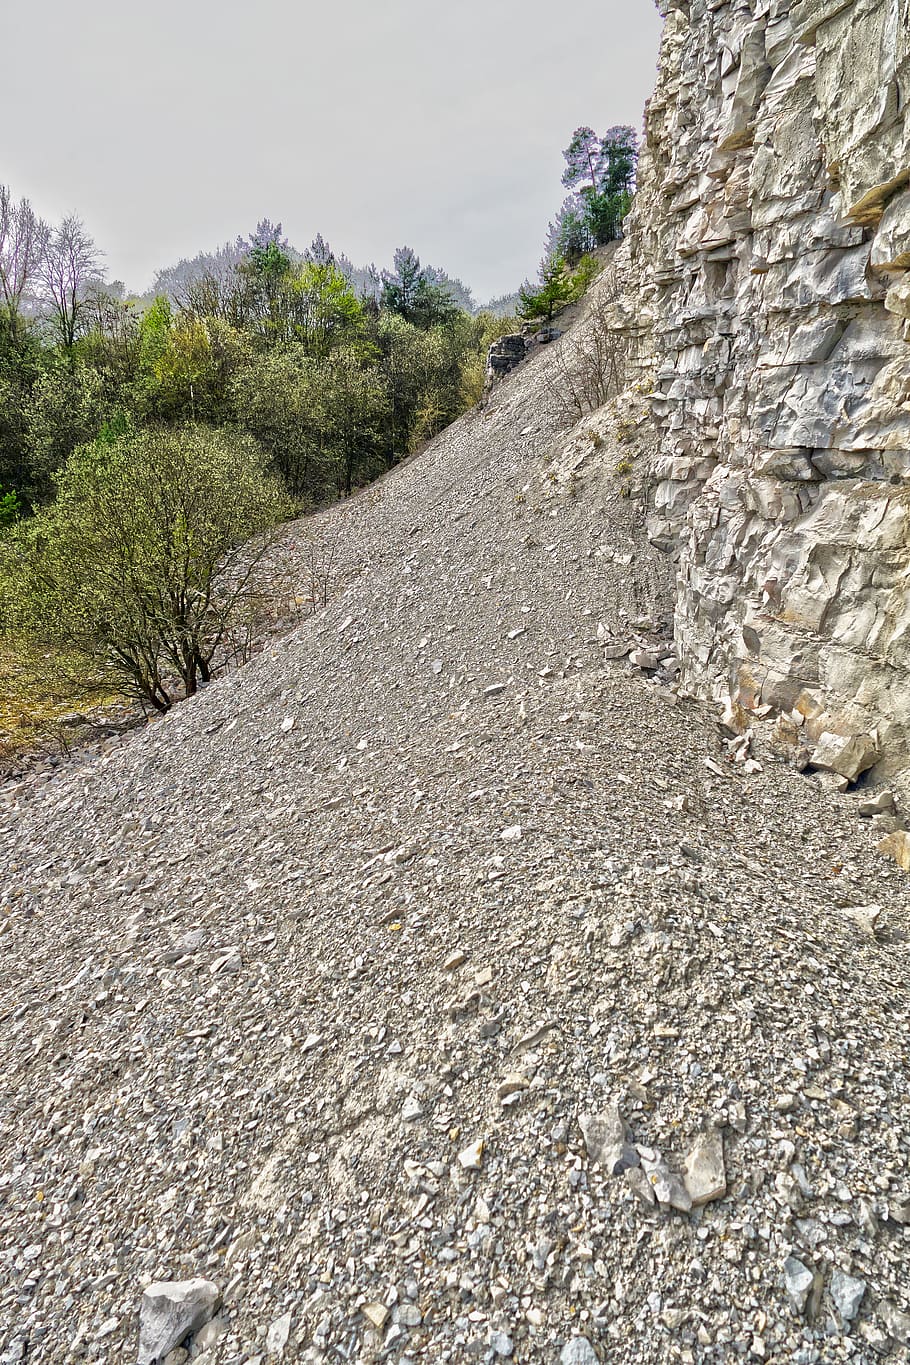 quarry, trees, rock, stone, schroff, overburden, scree, decay, limestone, weathered